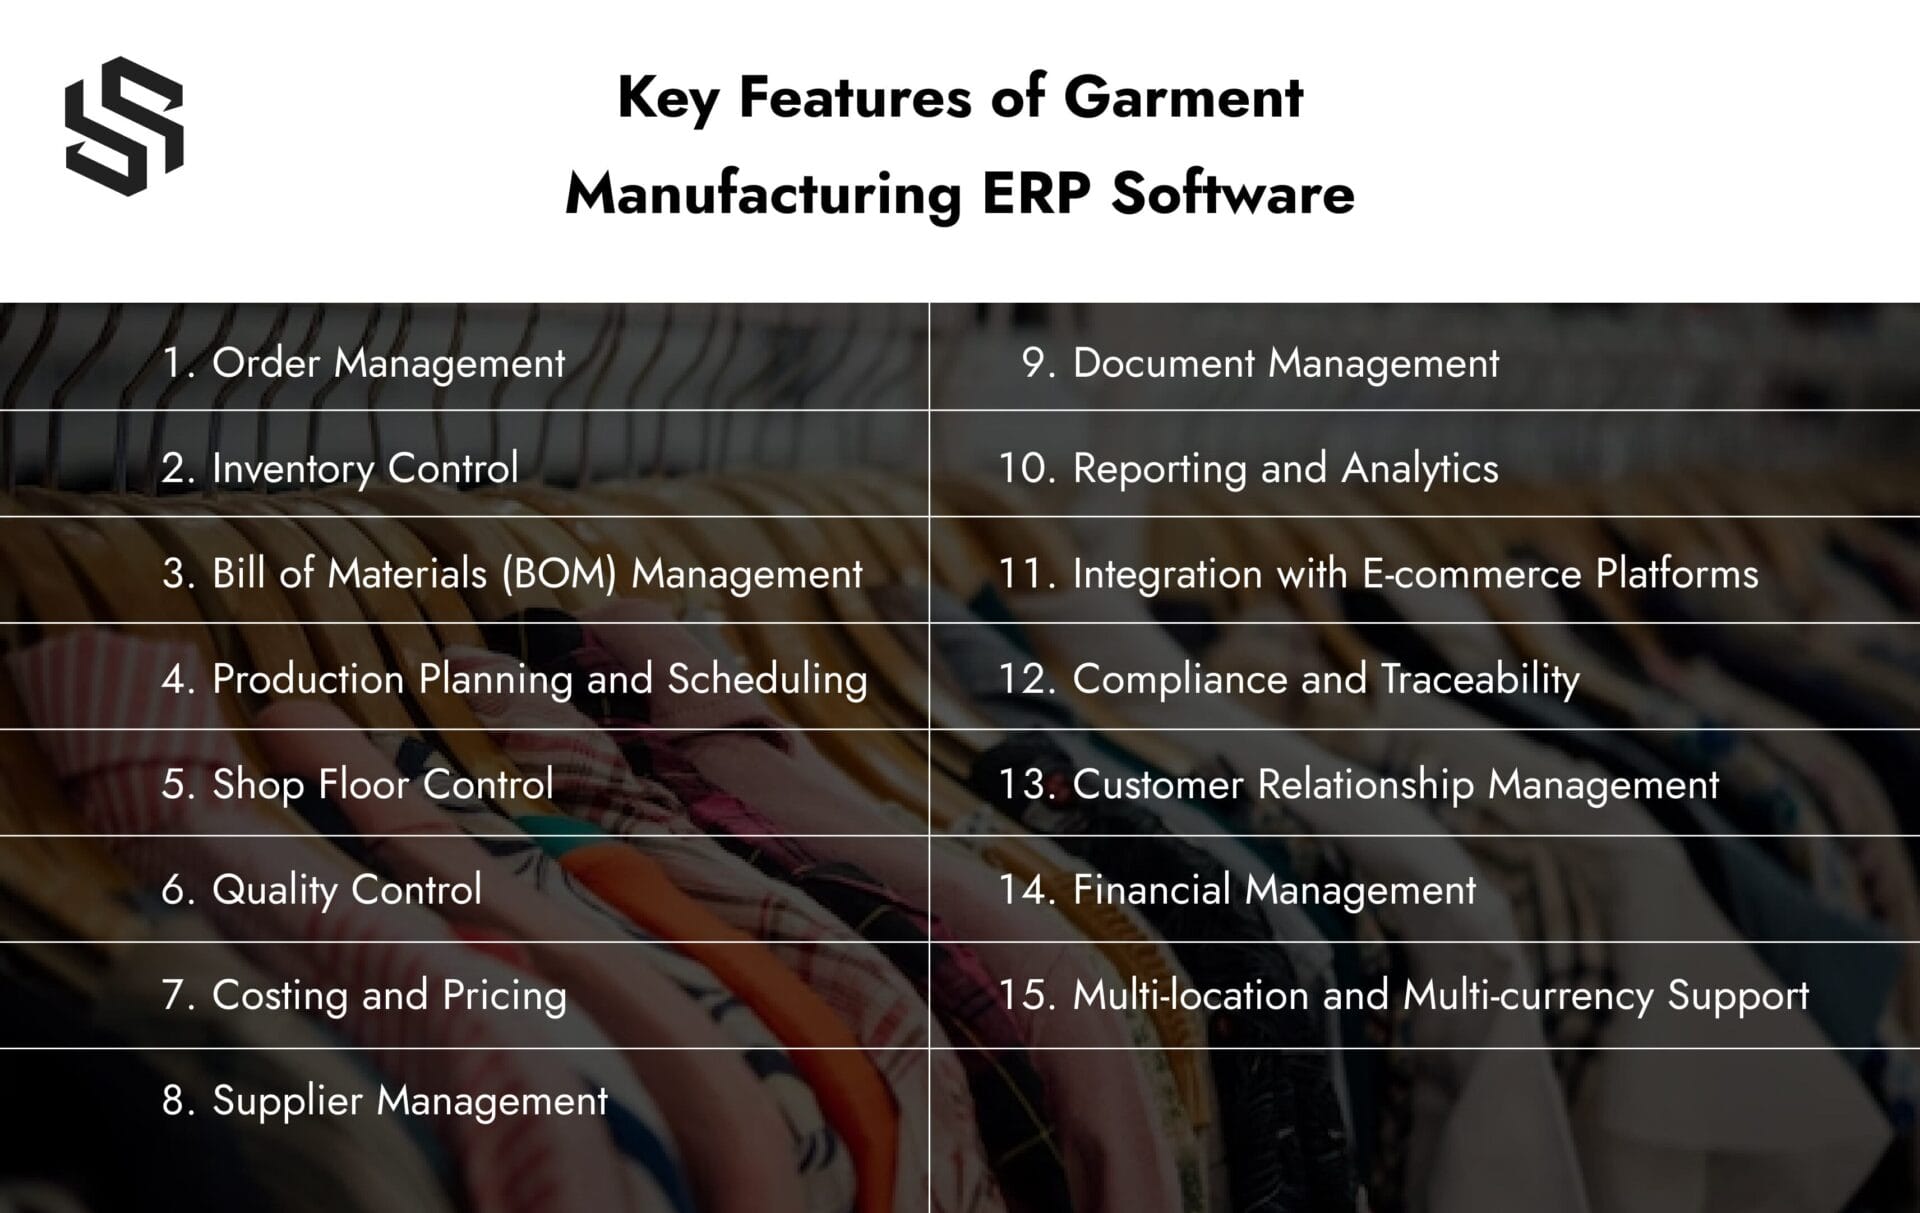 Key Features of Garment Manufacturing ERP Software